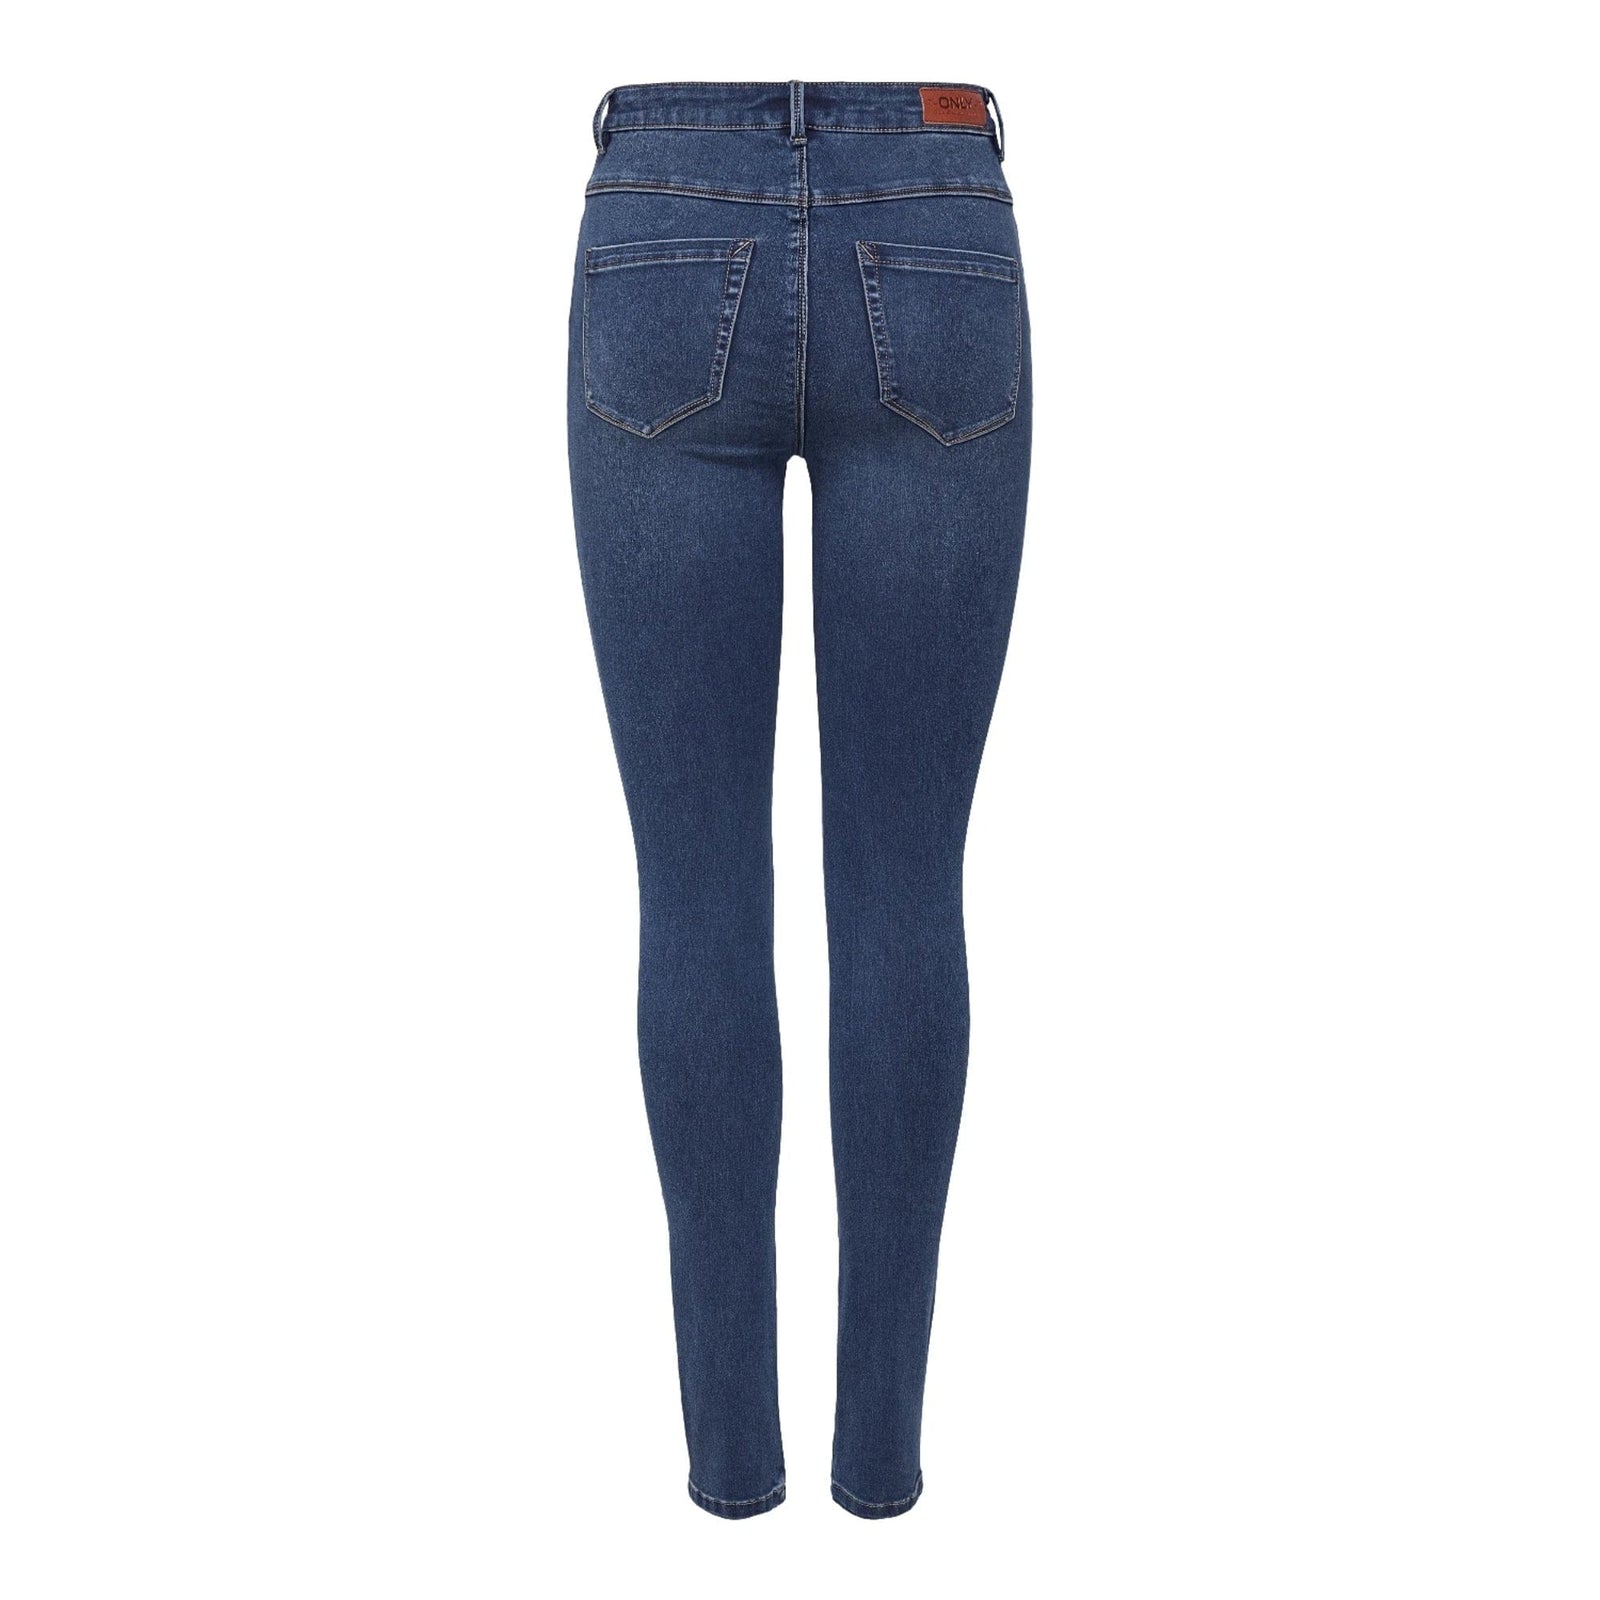 ONLY Onlroyal High Waisted Skinny Fit Jeans Leg 30 in Dark Blue Denim